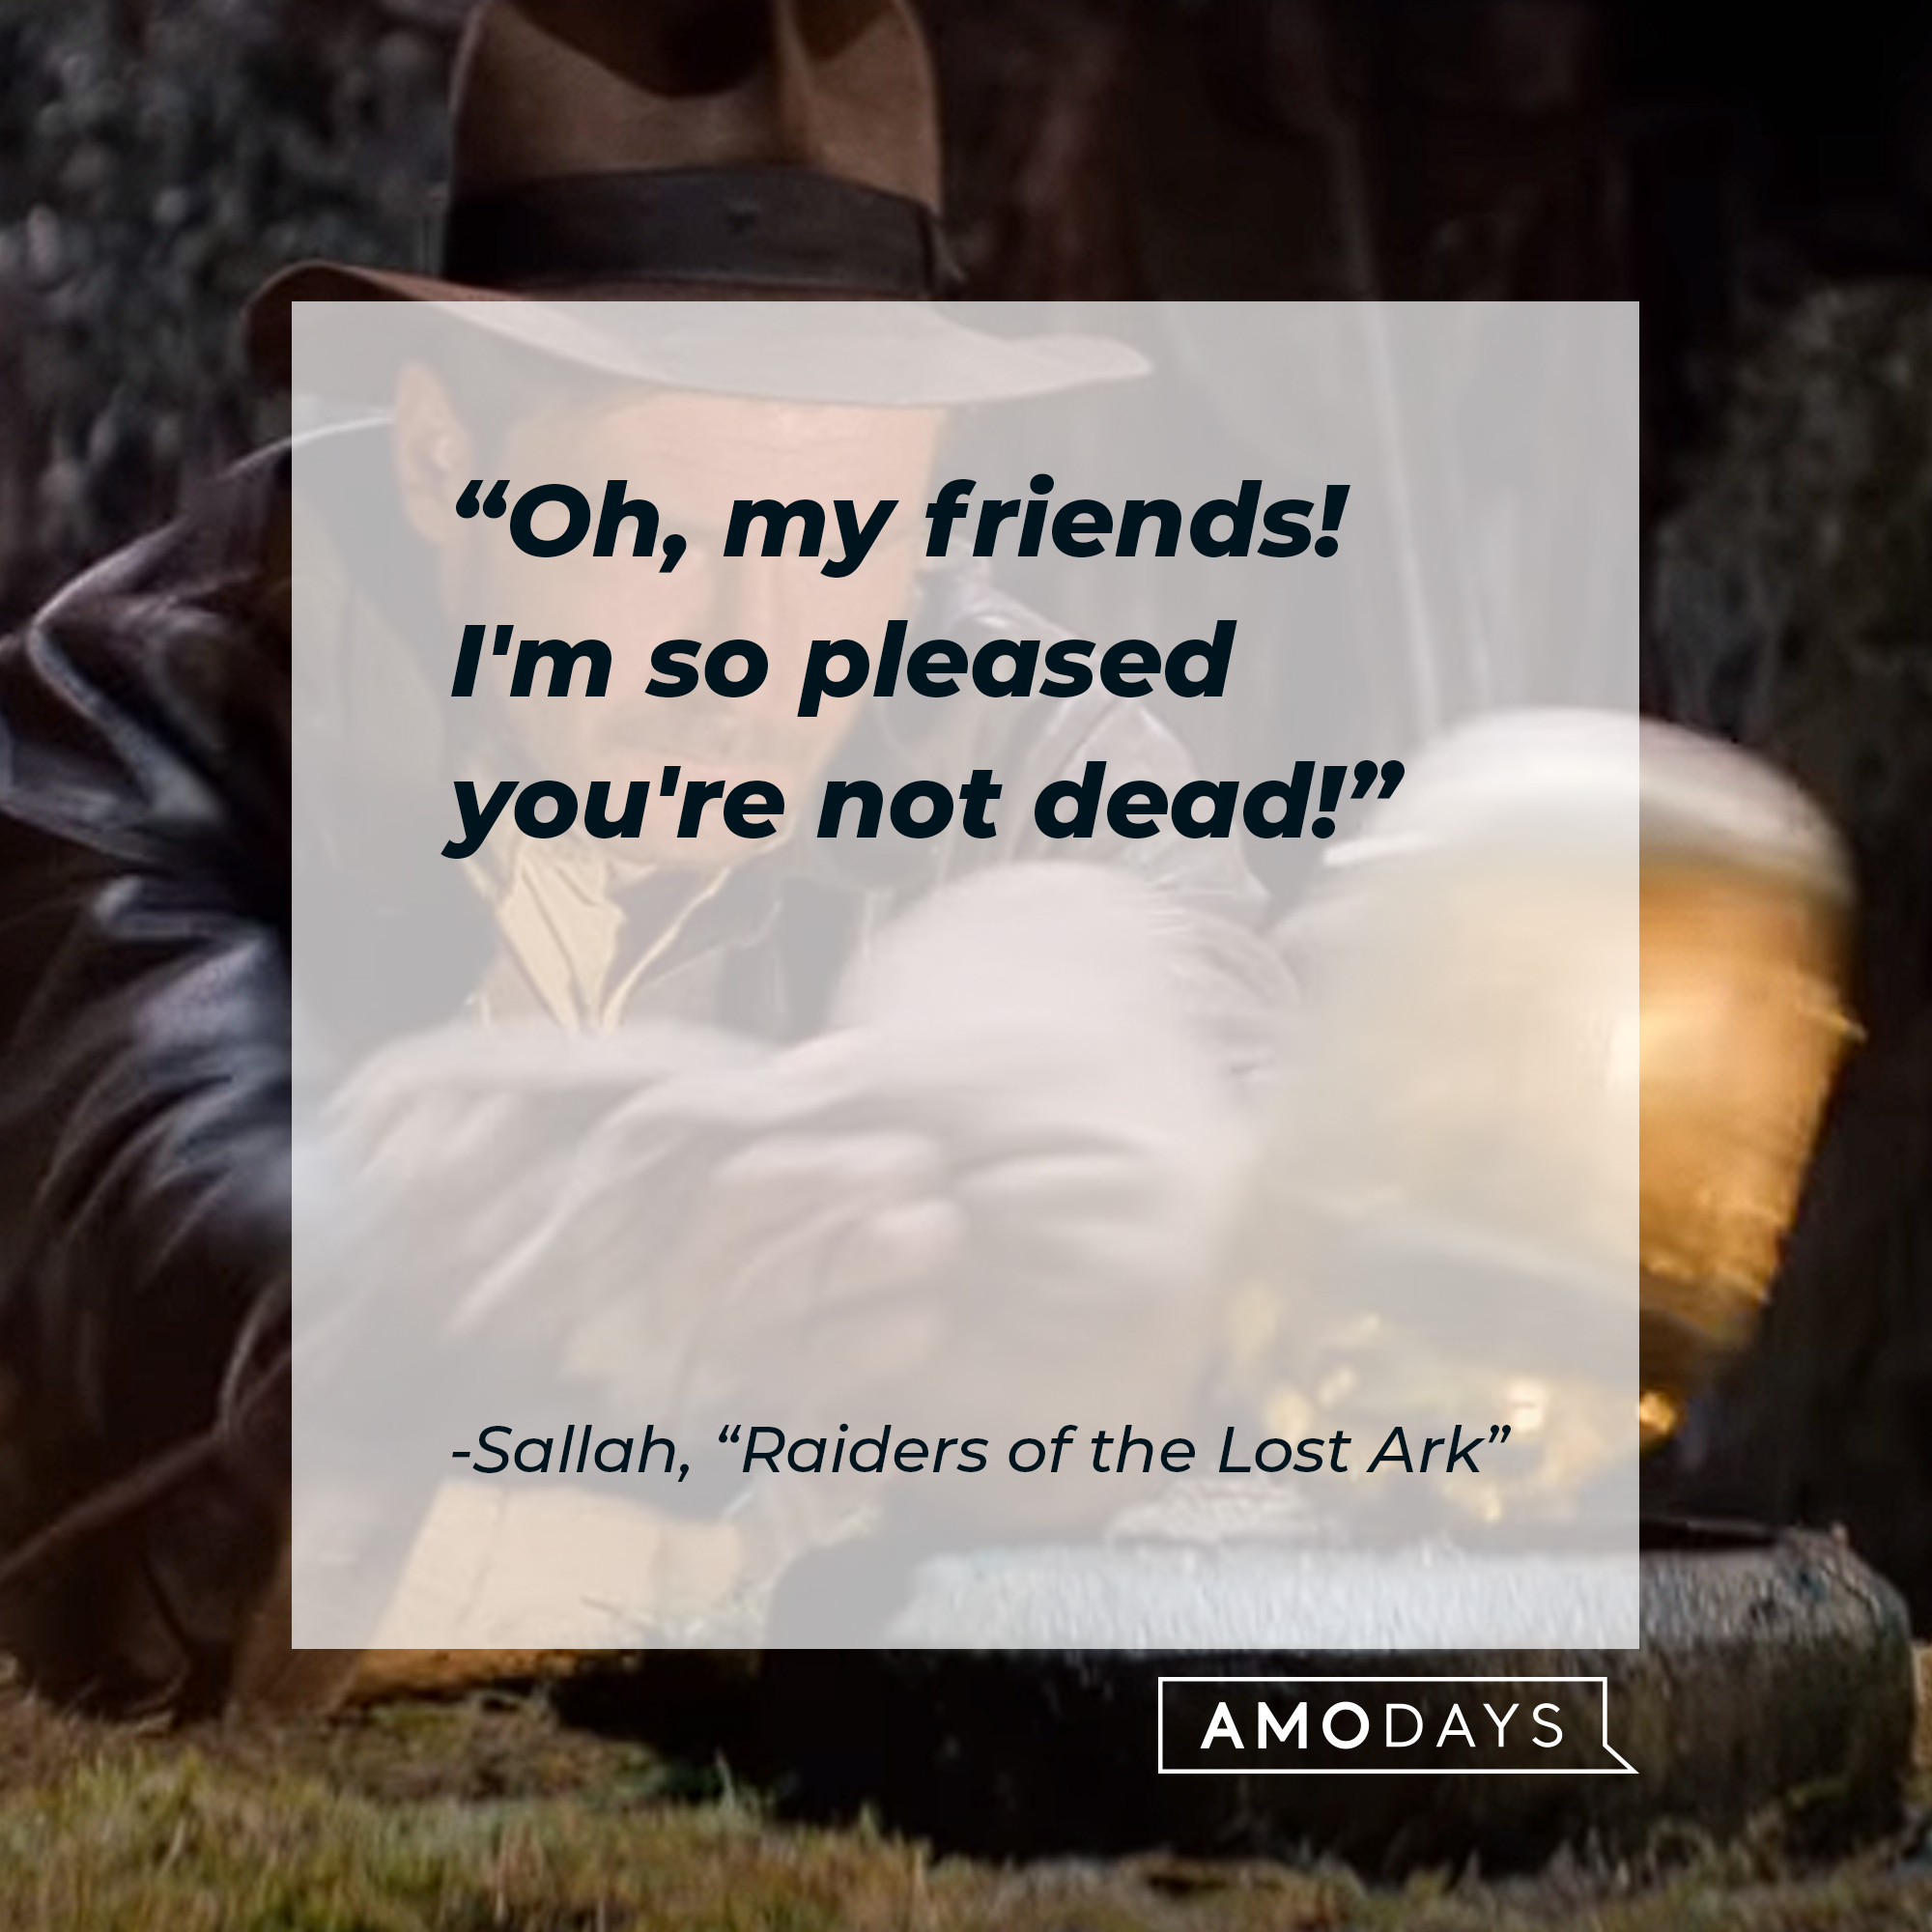 A photo of Indiana Jones with the quote, "Oh, my friends! I'm so pleased you're not dead!" | Source: YouTube/paramountmovies